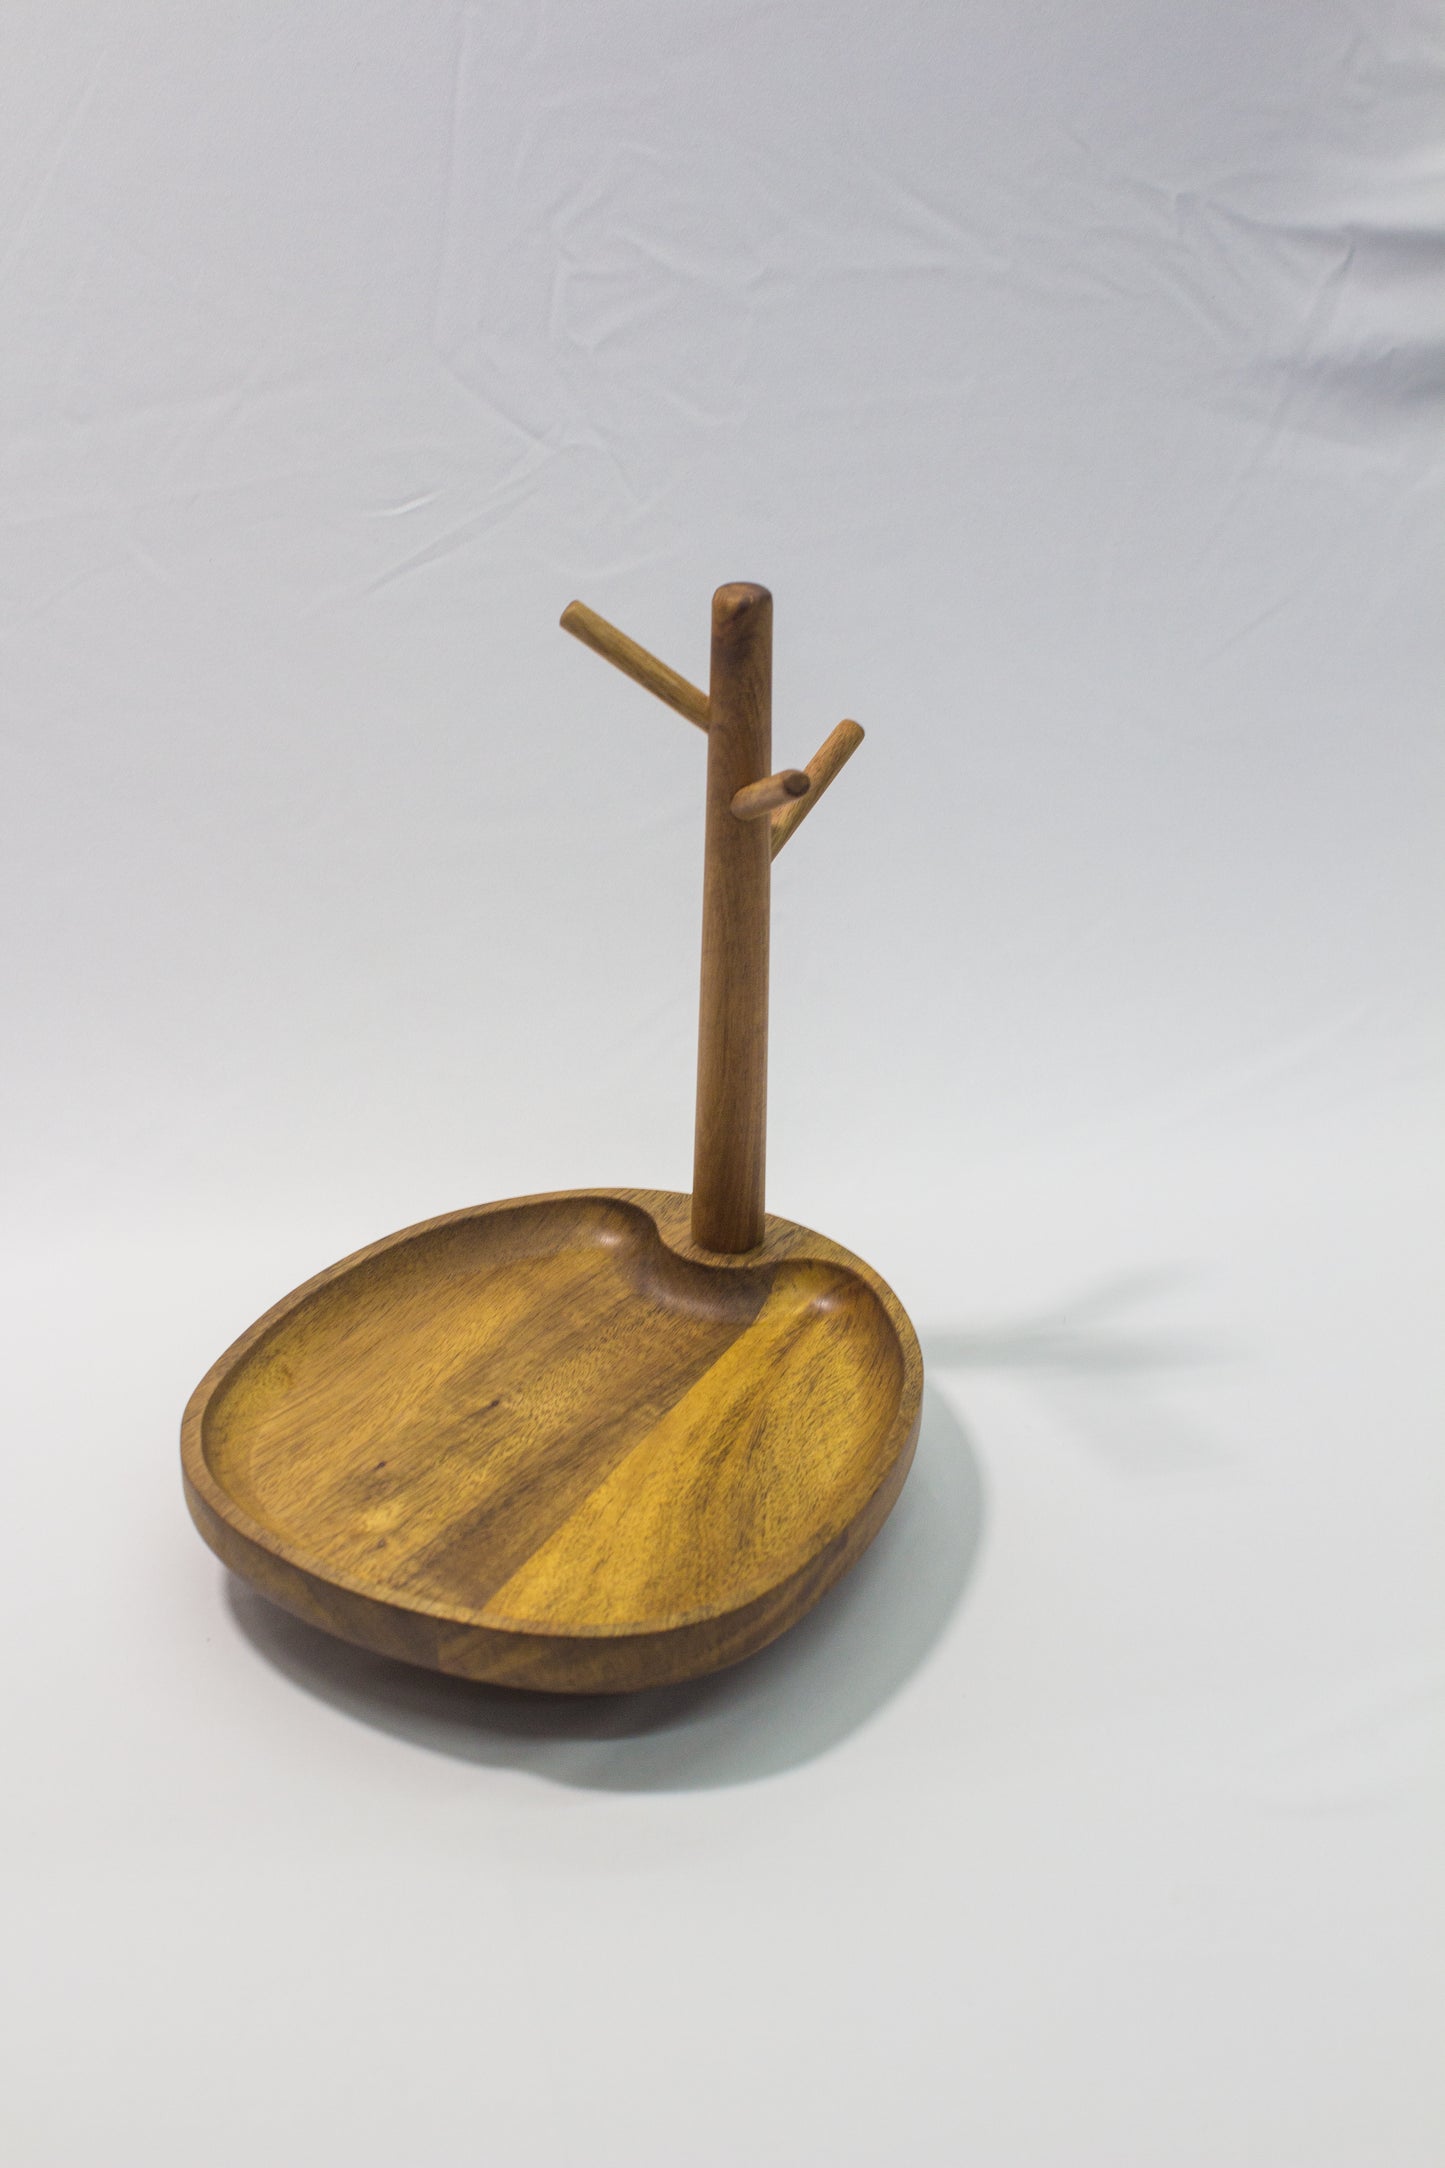 Solid wood jewelry/keyholder stand/tray